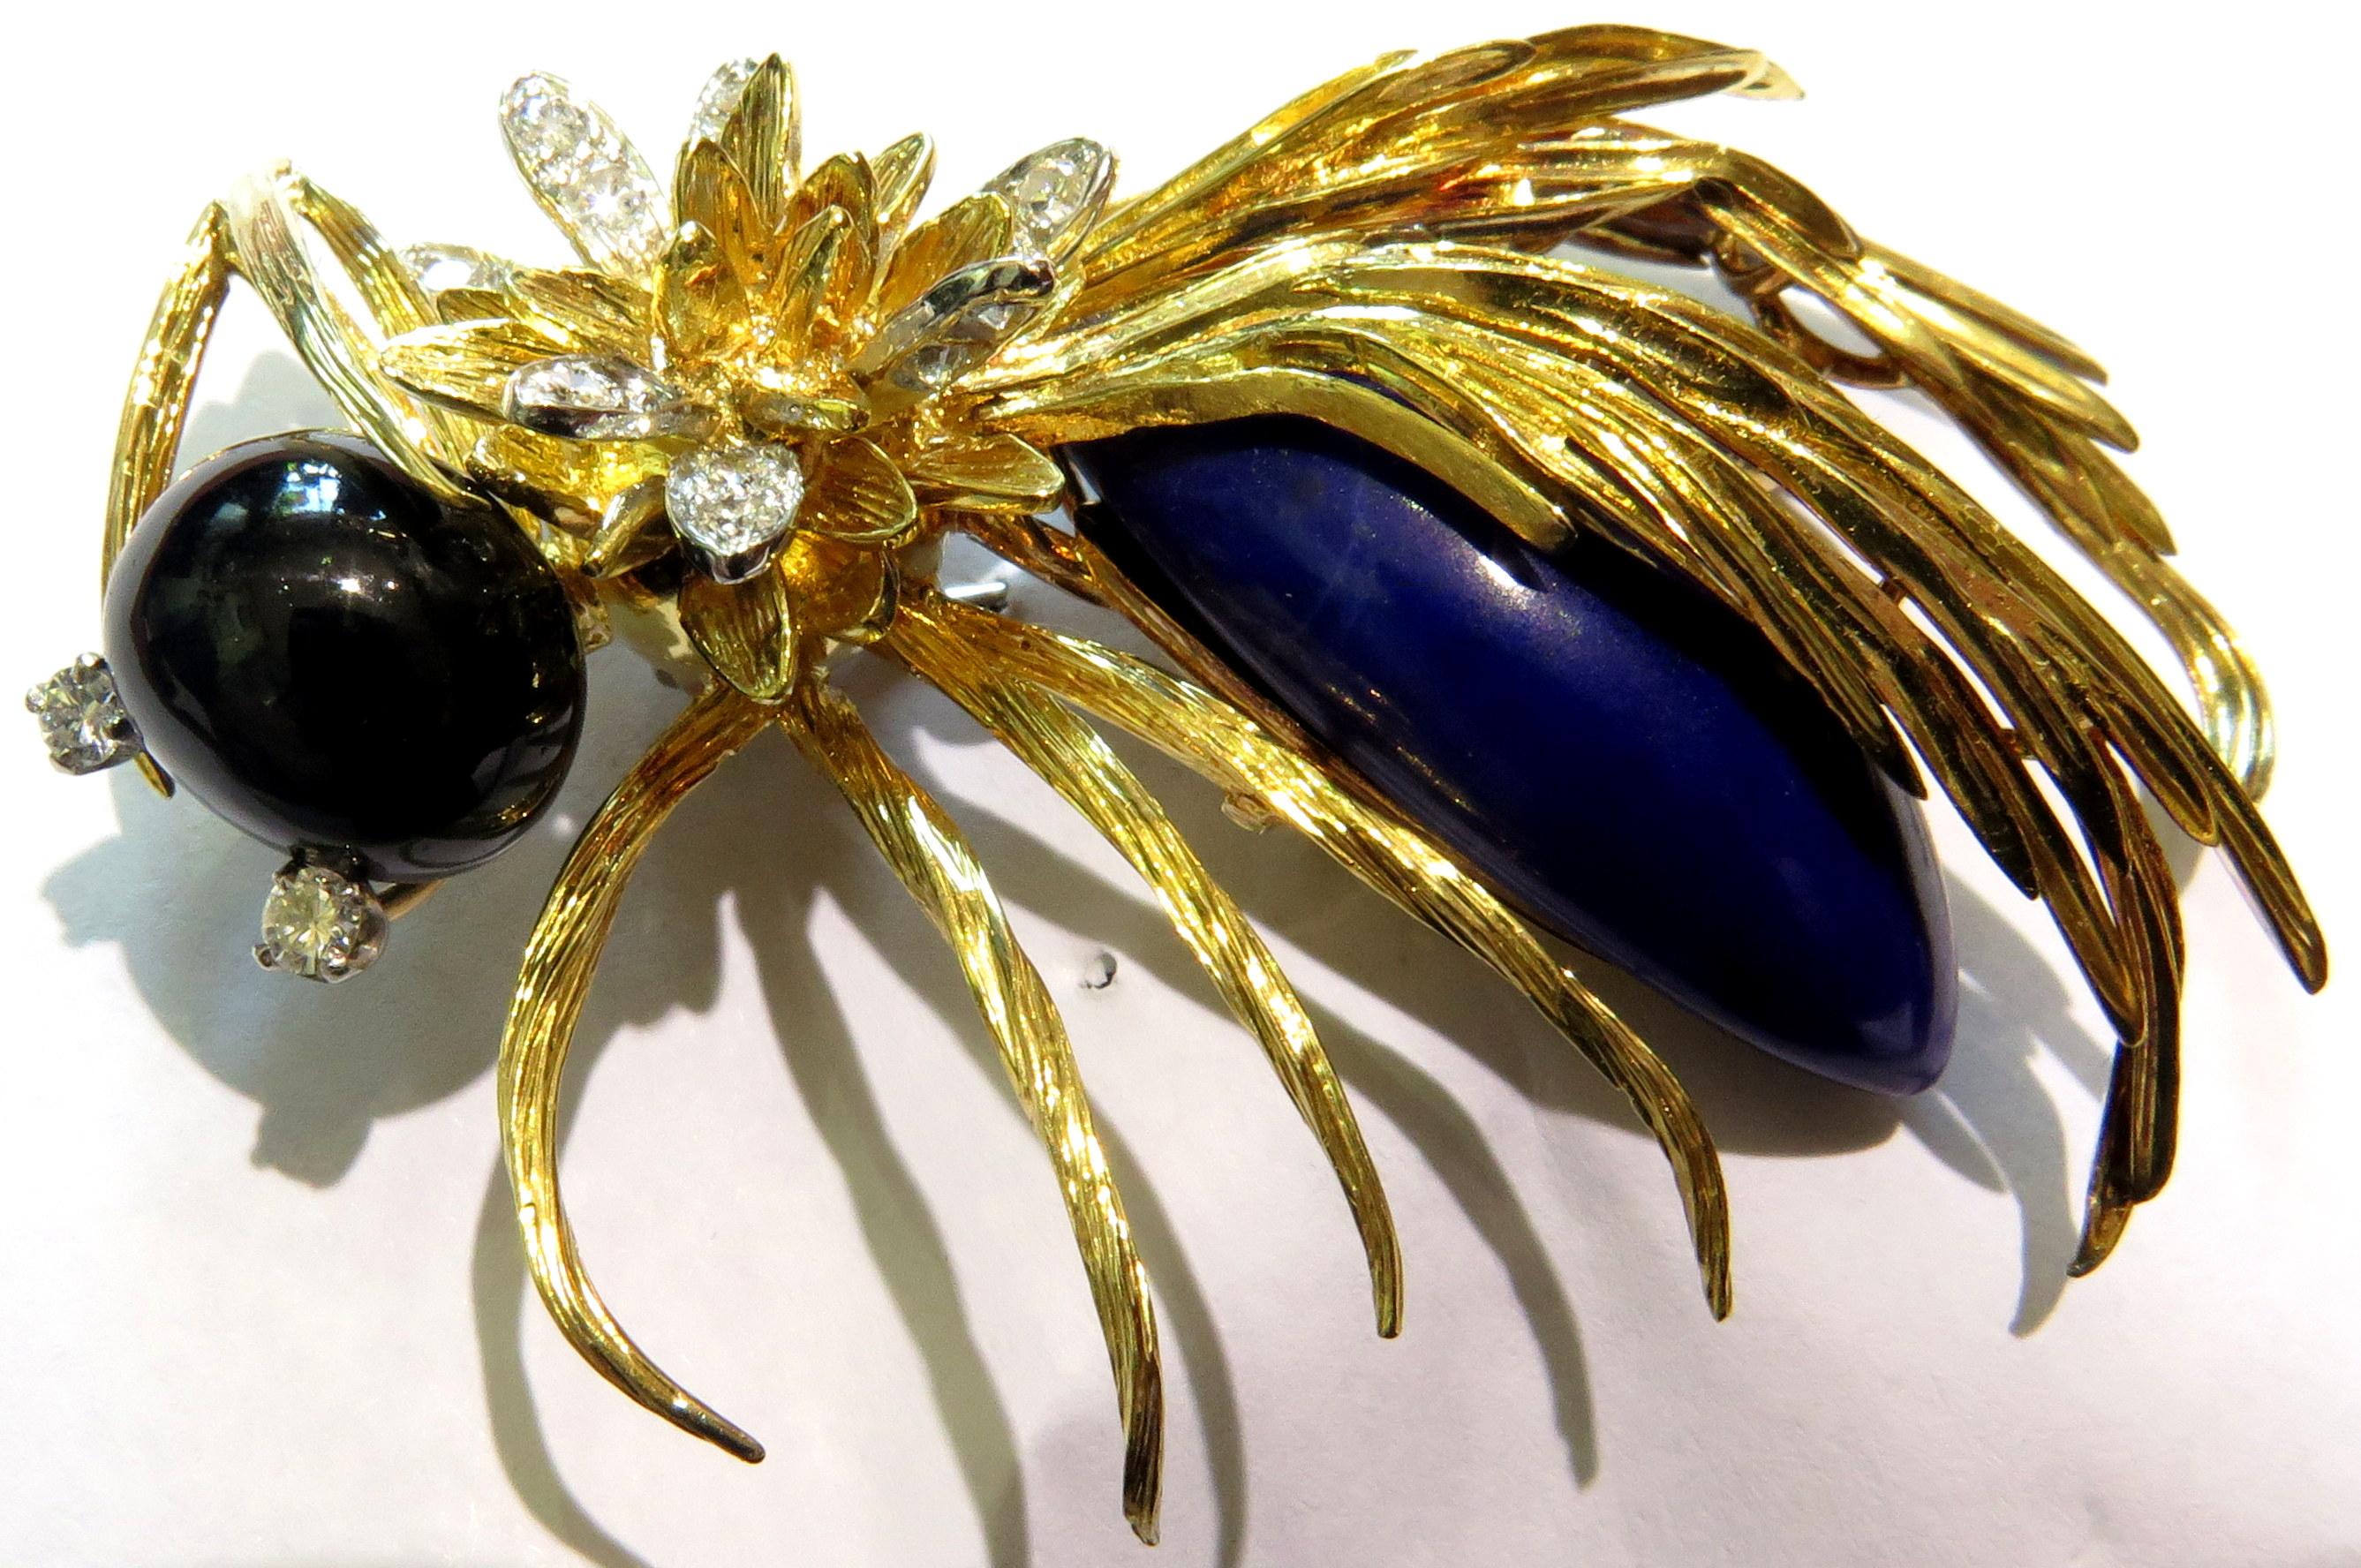 Huge Hammerman Brothers Platinum Gold Wasp Pin Brooch With Diamonds Lapis & Onyx For Sale 2